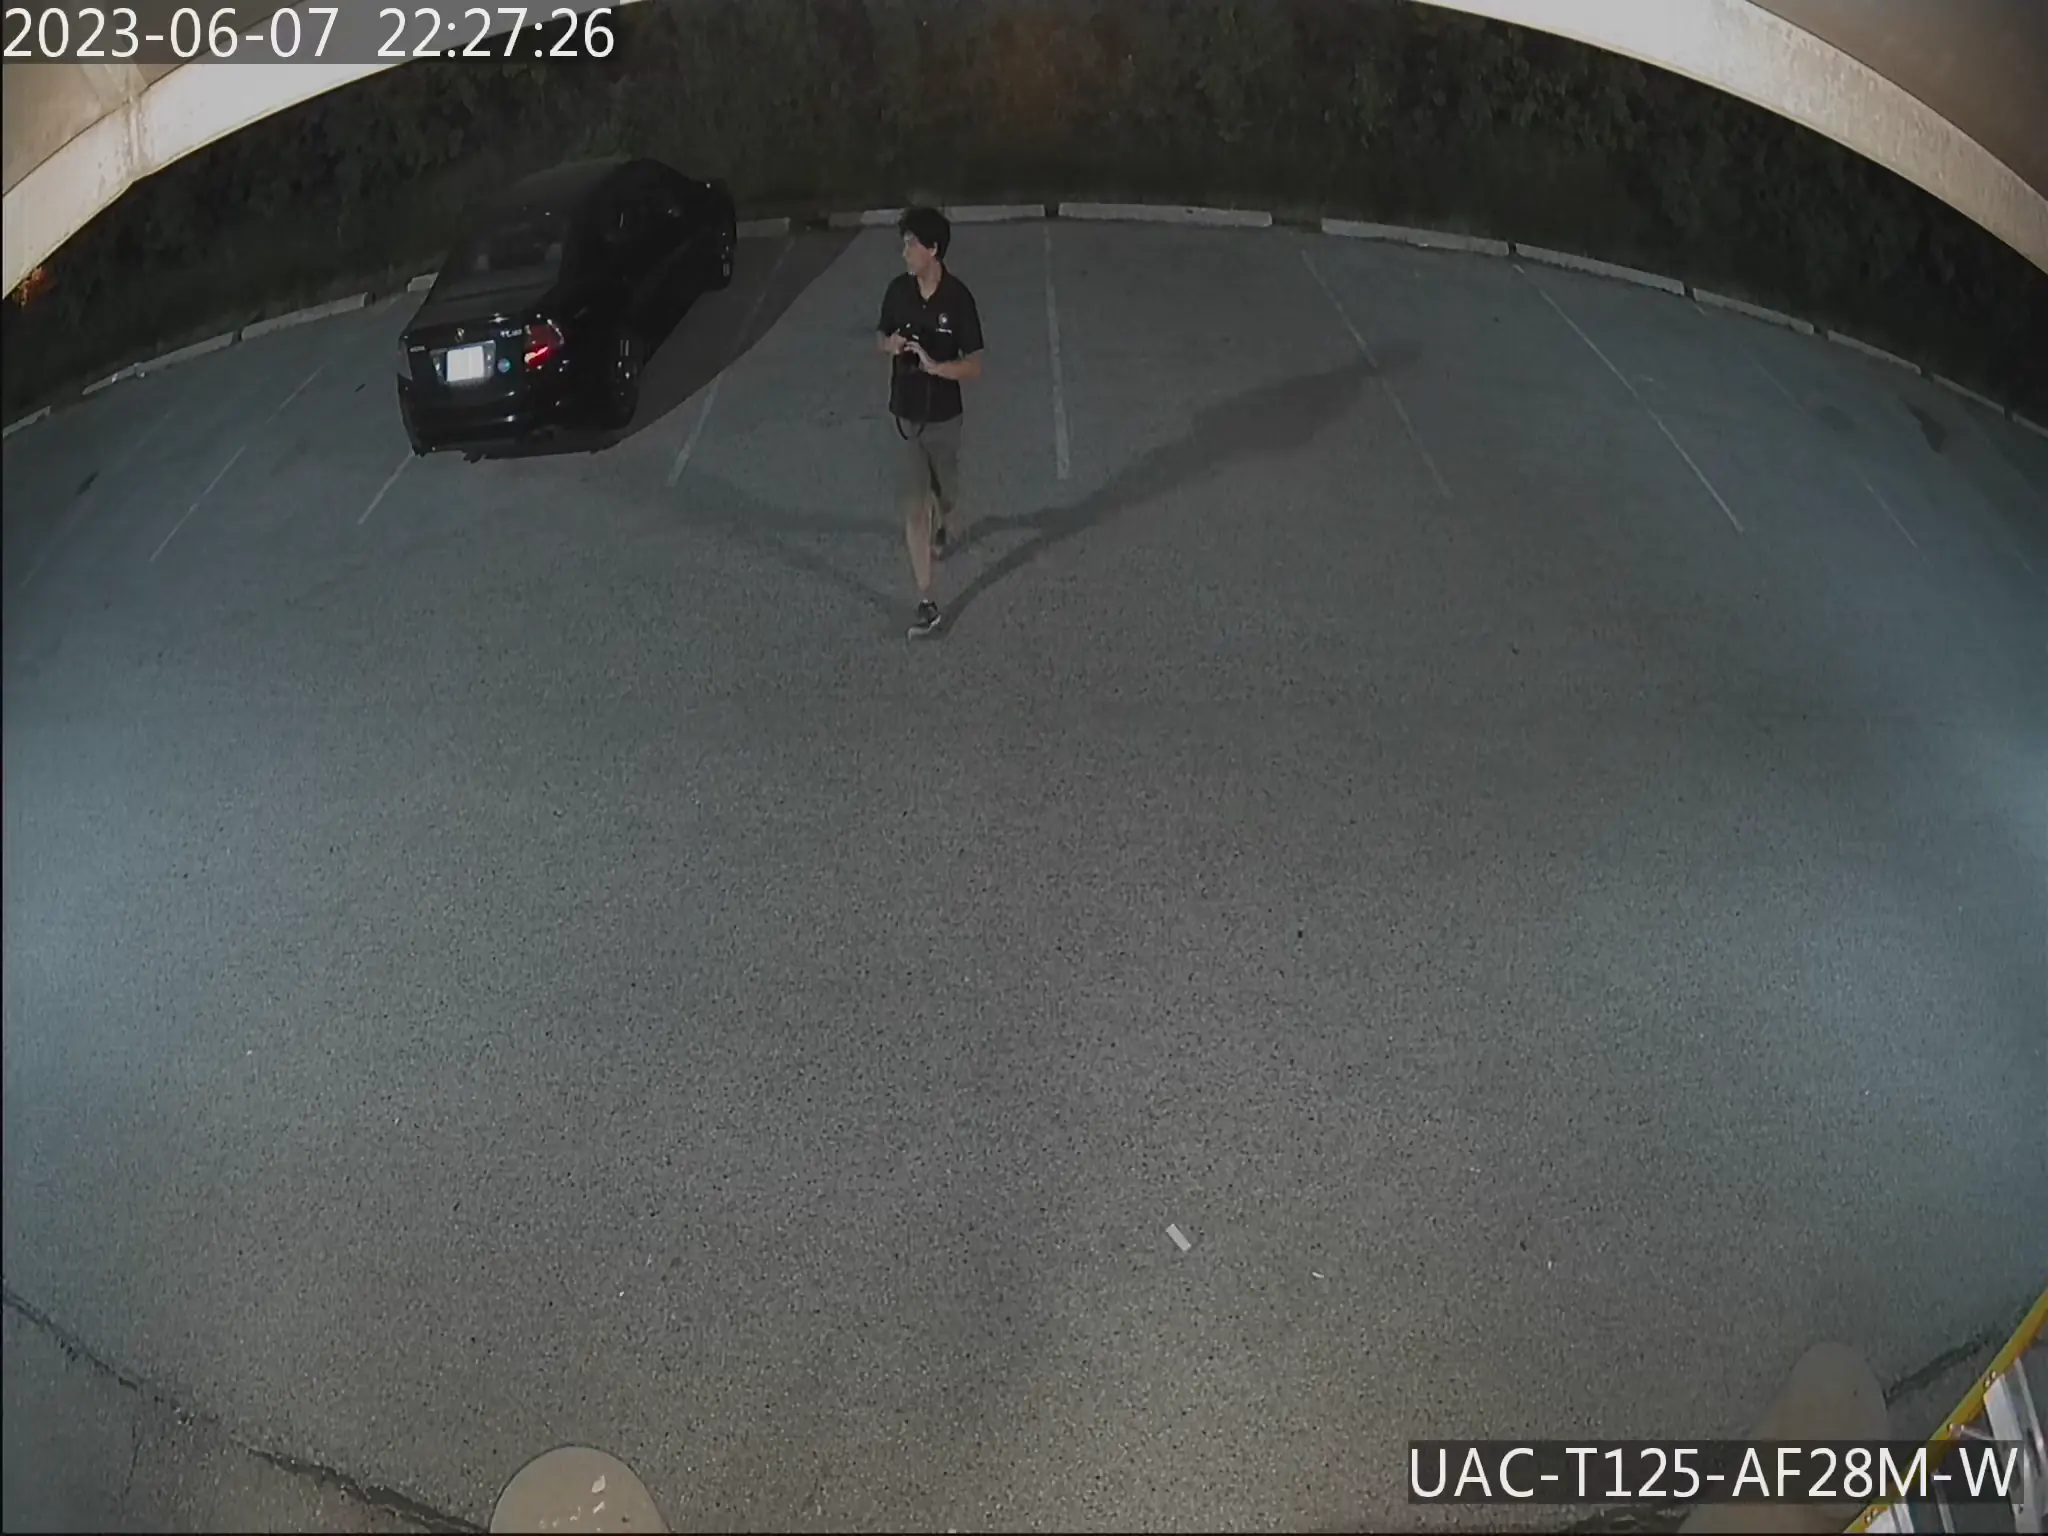 Security camera footage of a parking lot with a person standing beside a blackk car